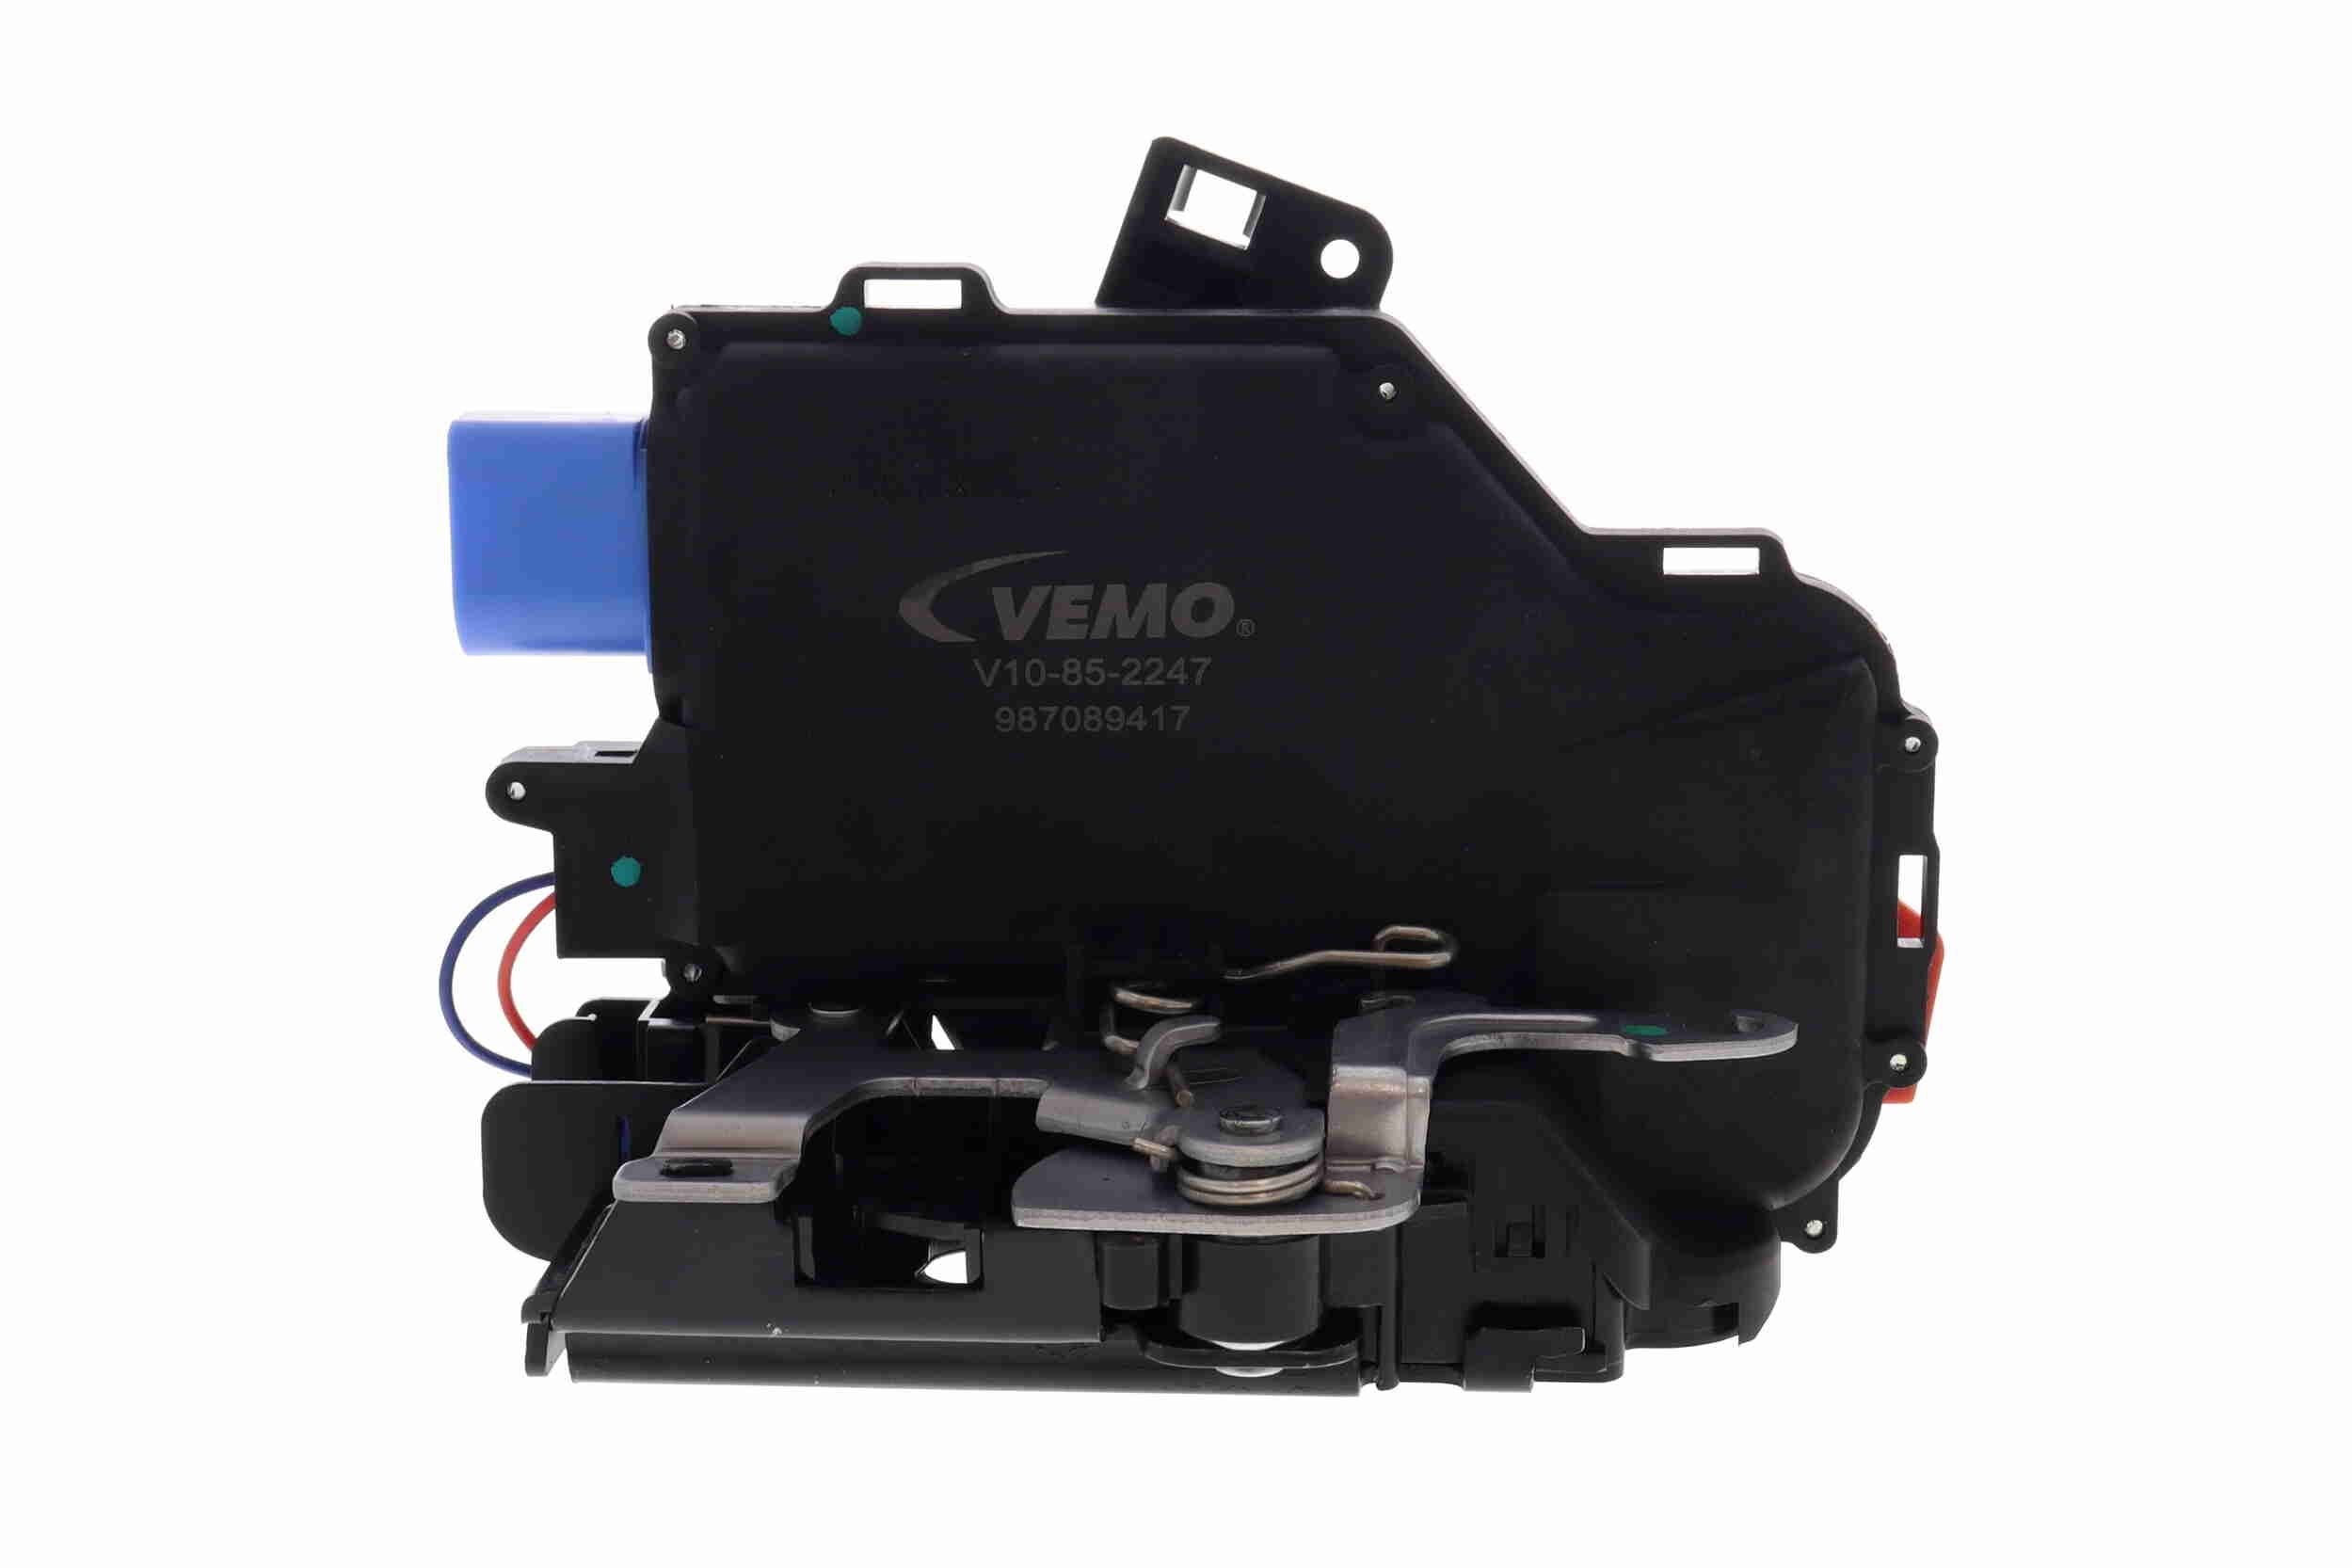 VEMO V10-85-2247 Door lock for vehicles with central locking, Left Rear